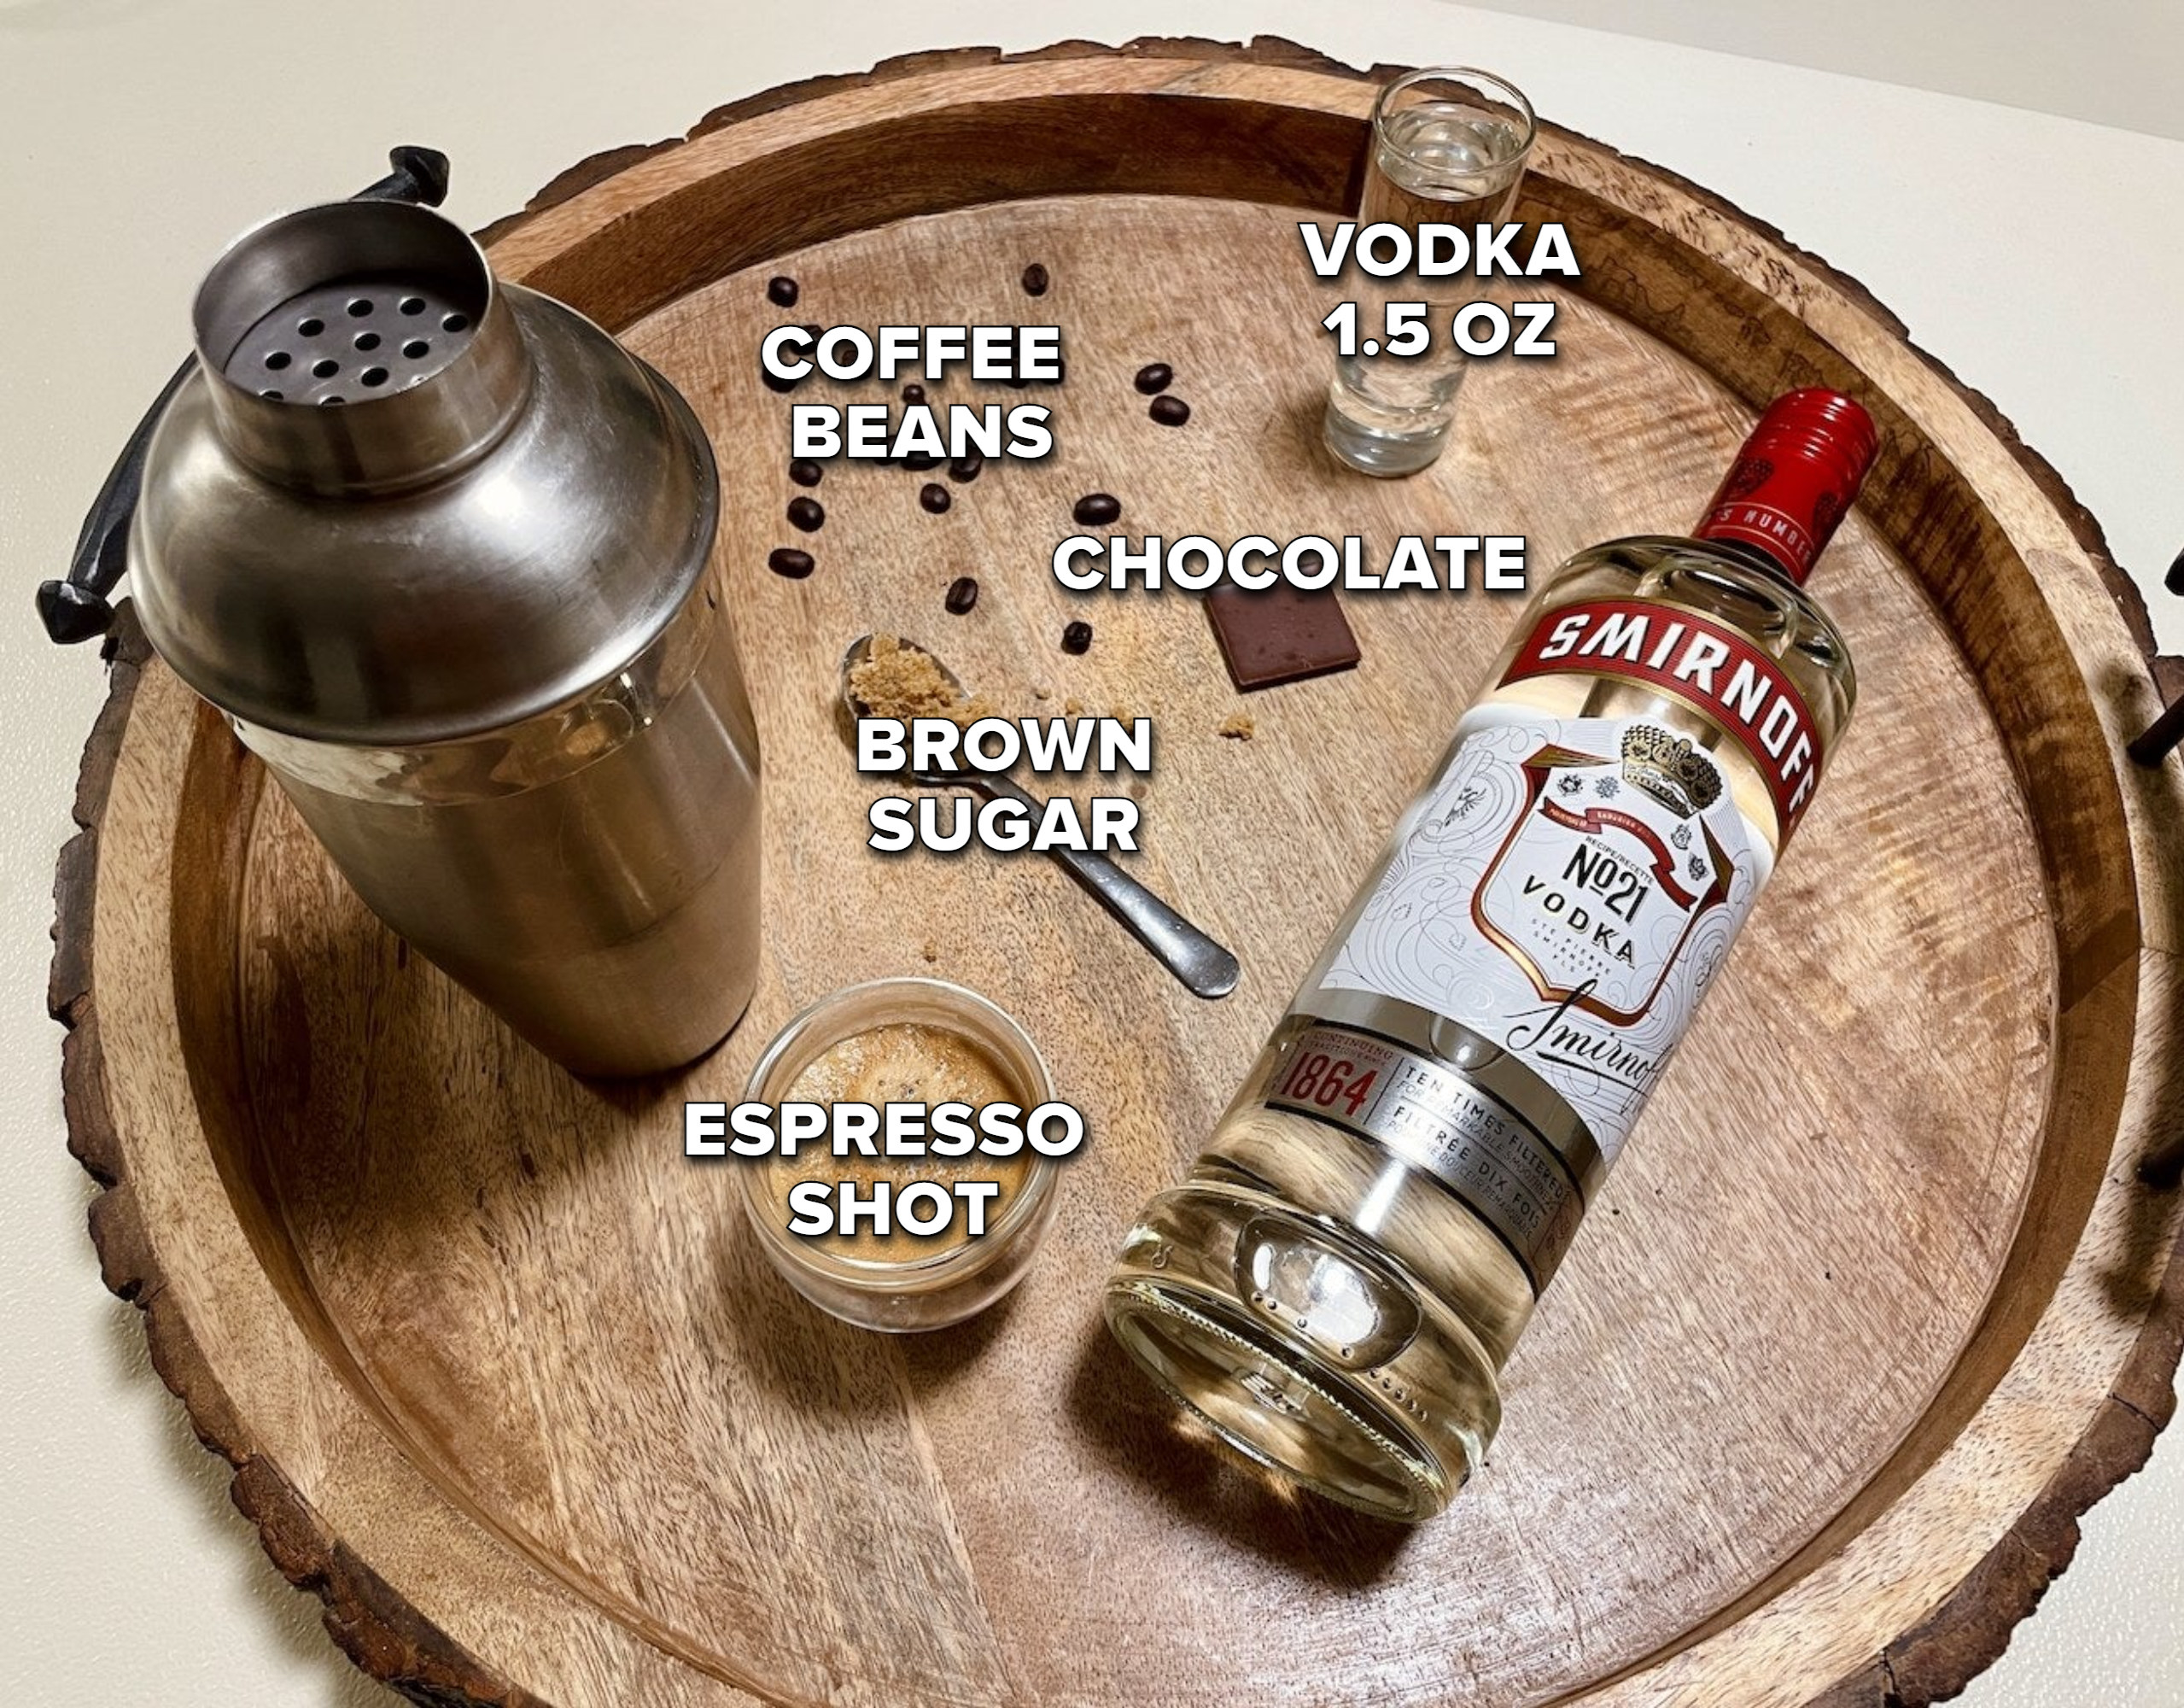 a shot of espresso, a shaker, brown sugar, coffee beans, chocolate, and vodka